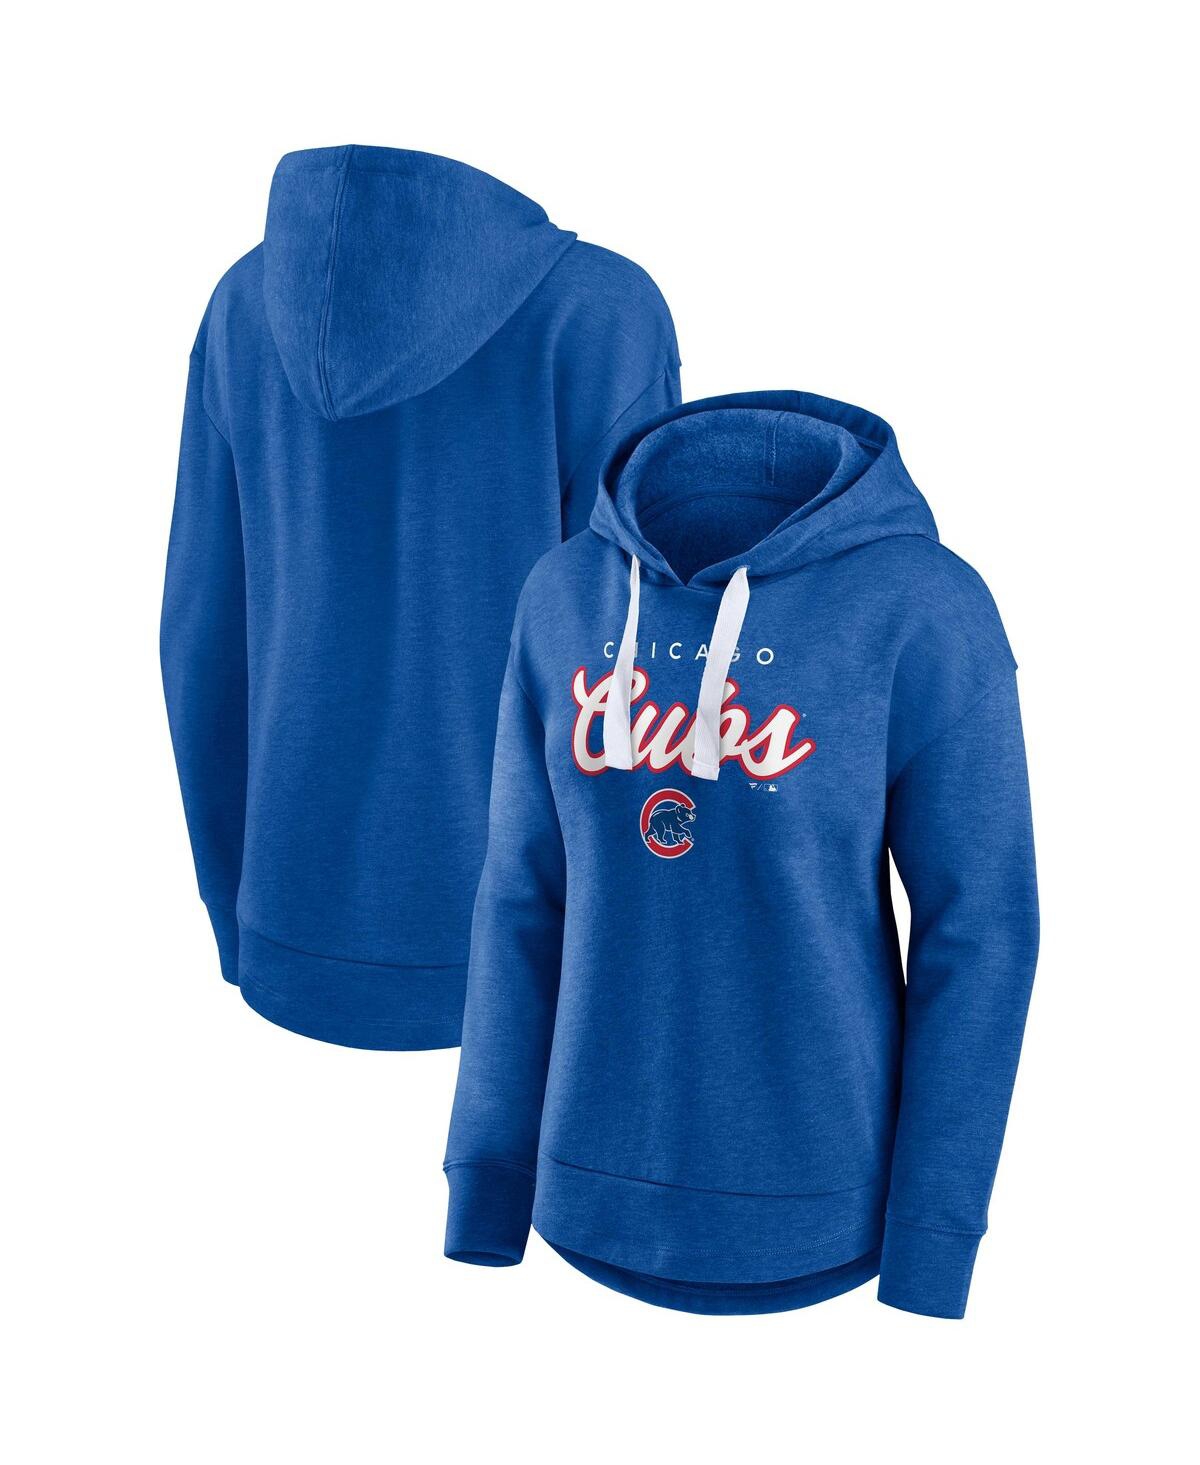 Shop Fanatics Women's  Heathered Royal Chicago Cubs Set To Fly Pullover Hoodie